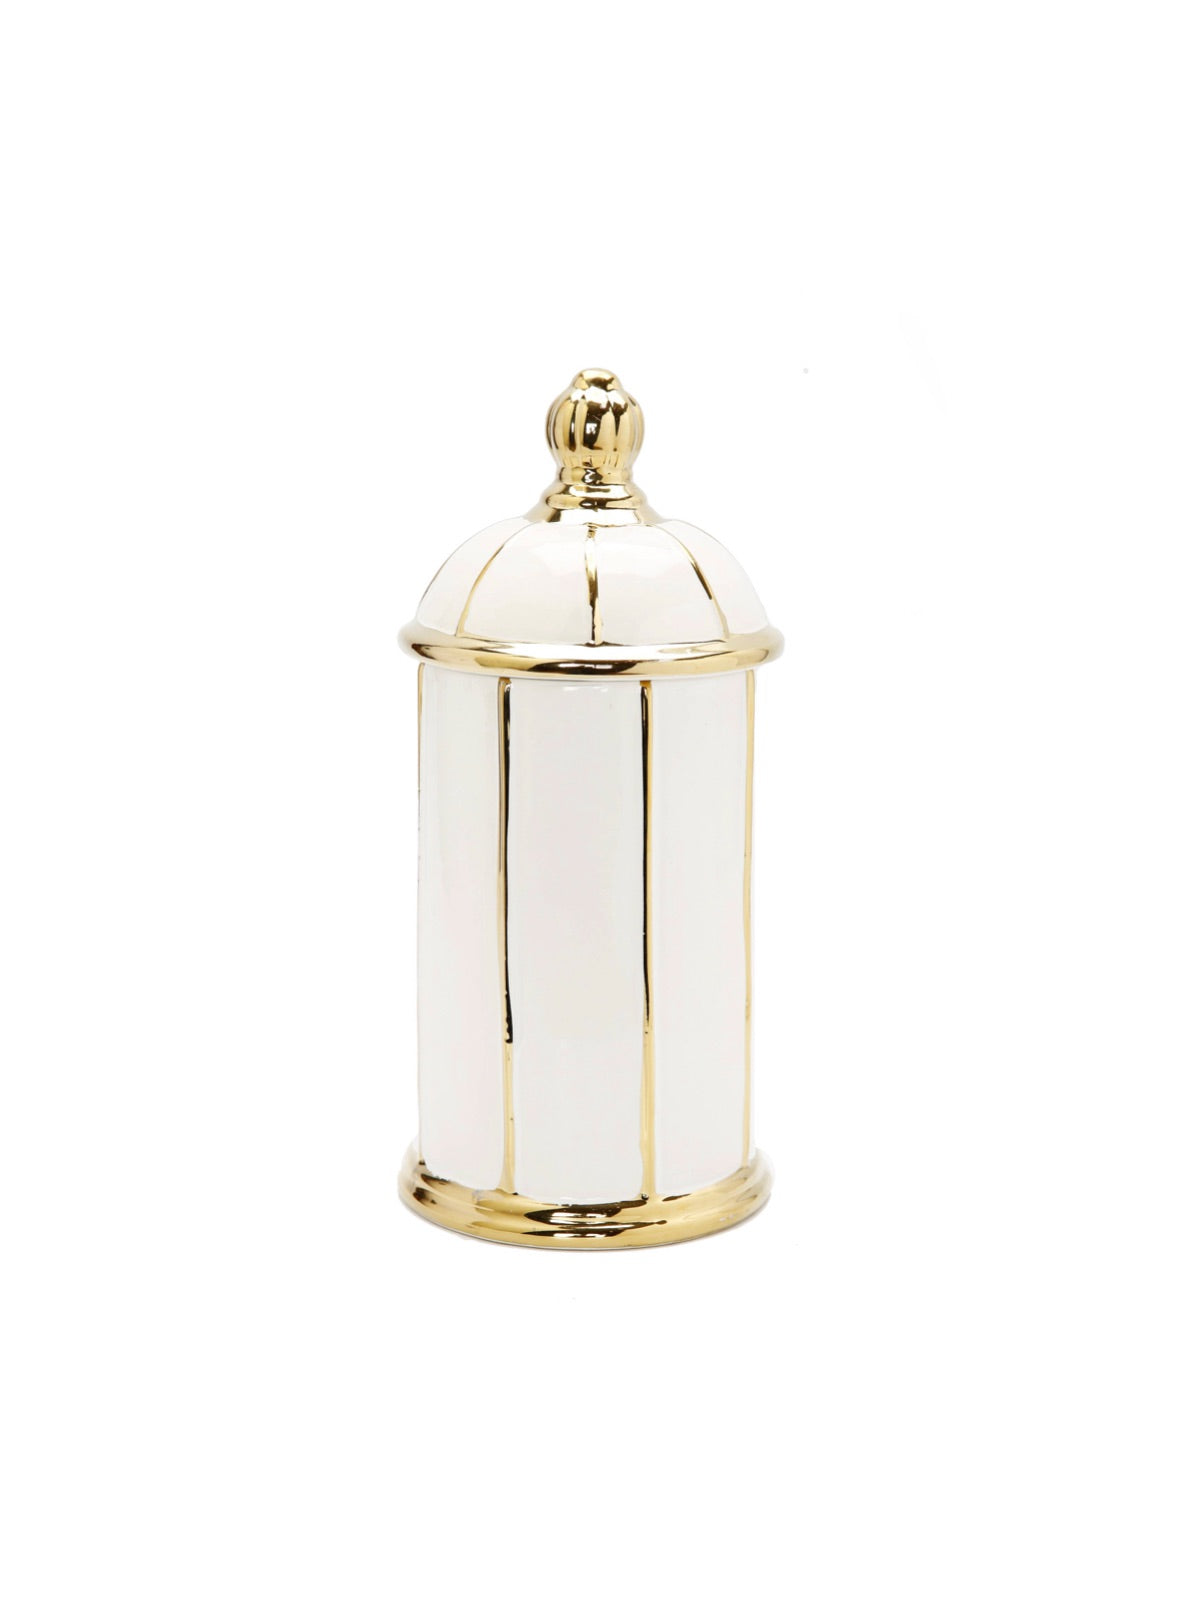 12H white and gold striped ceramic kitchen jars with dome design lid - KYA Home Decor.